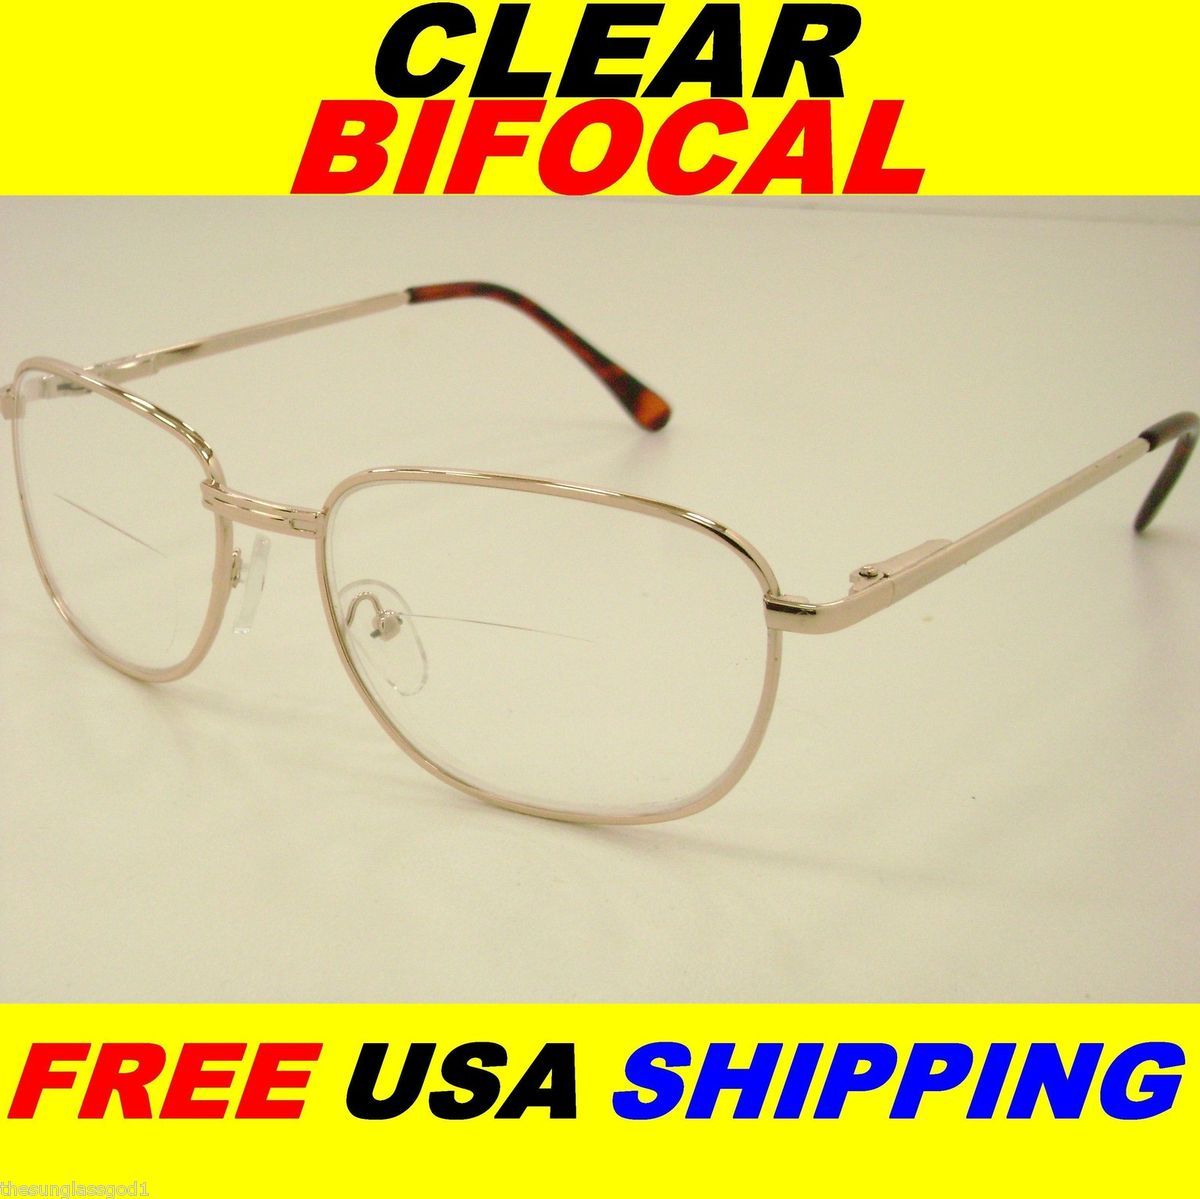 Bifocal Reading Glasses Clear Aviator New Spring Hinge Powers 1 50 2